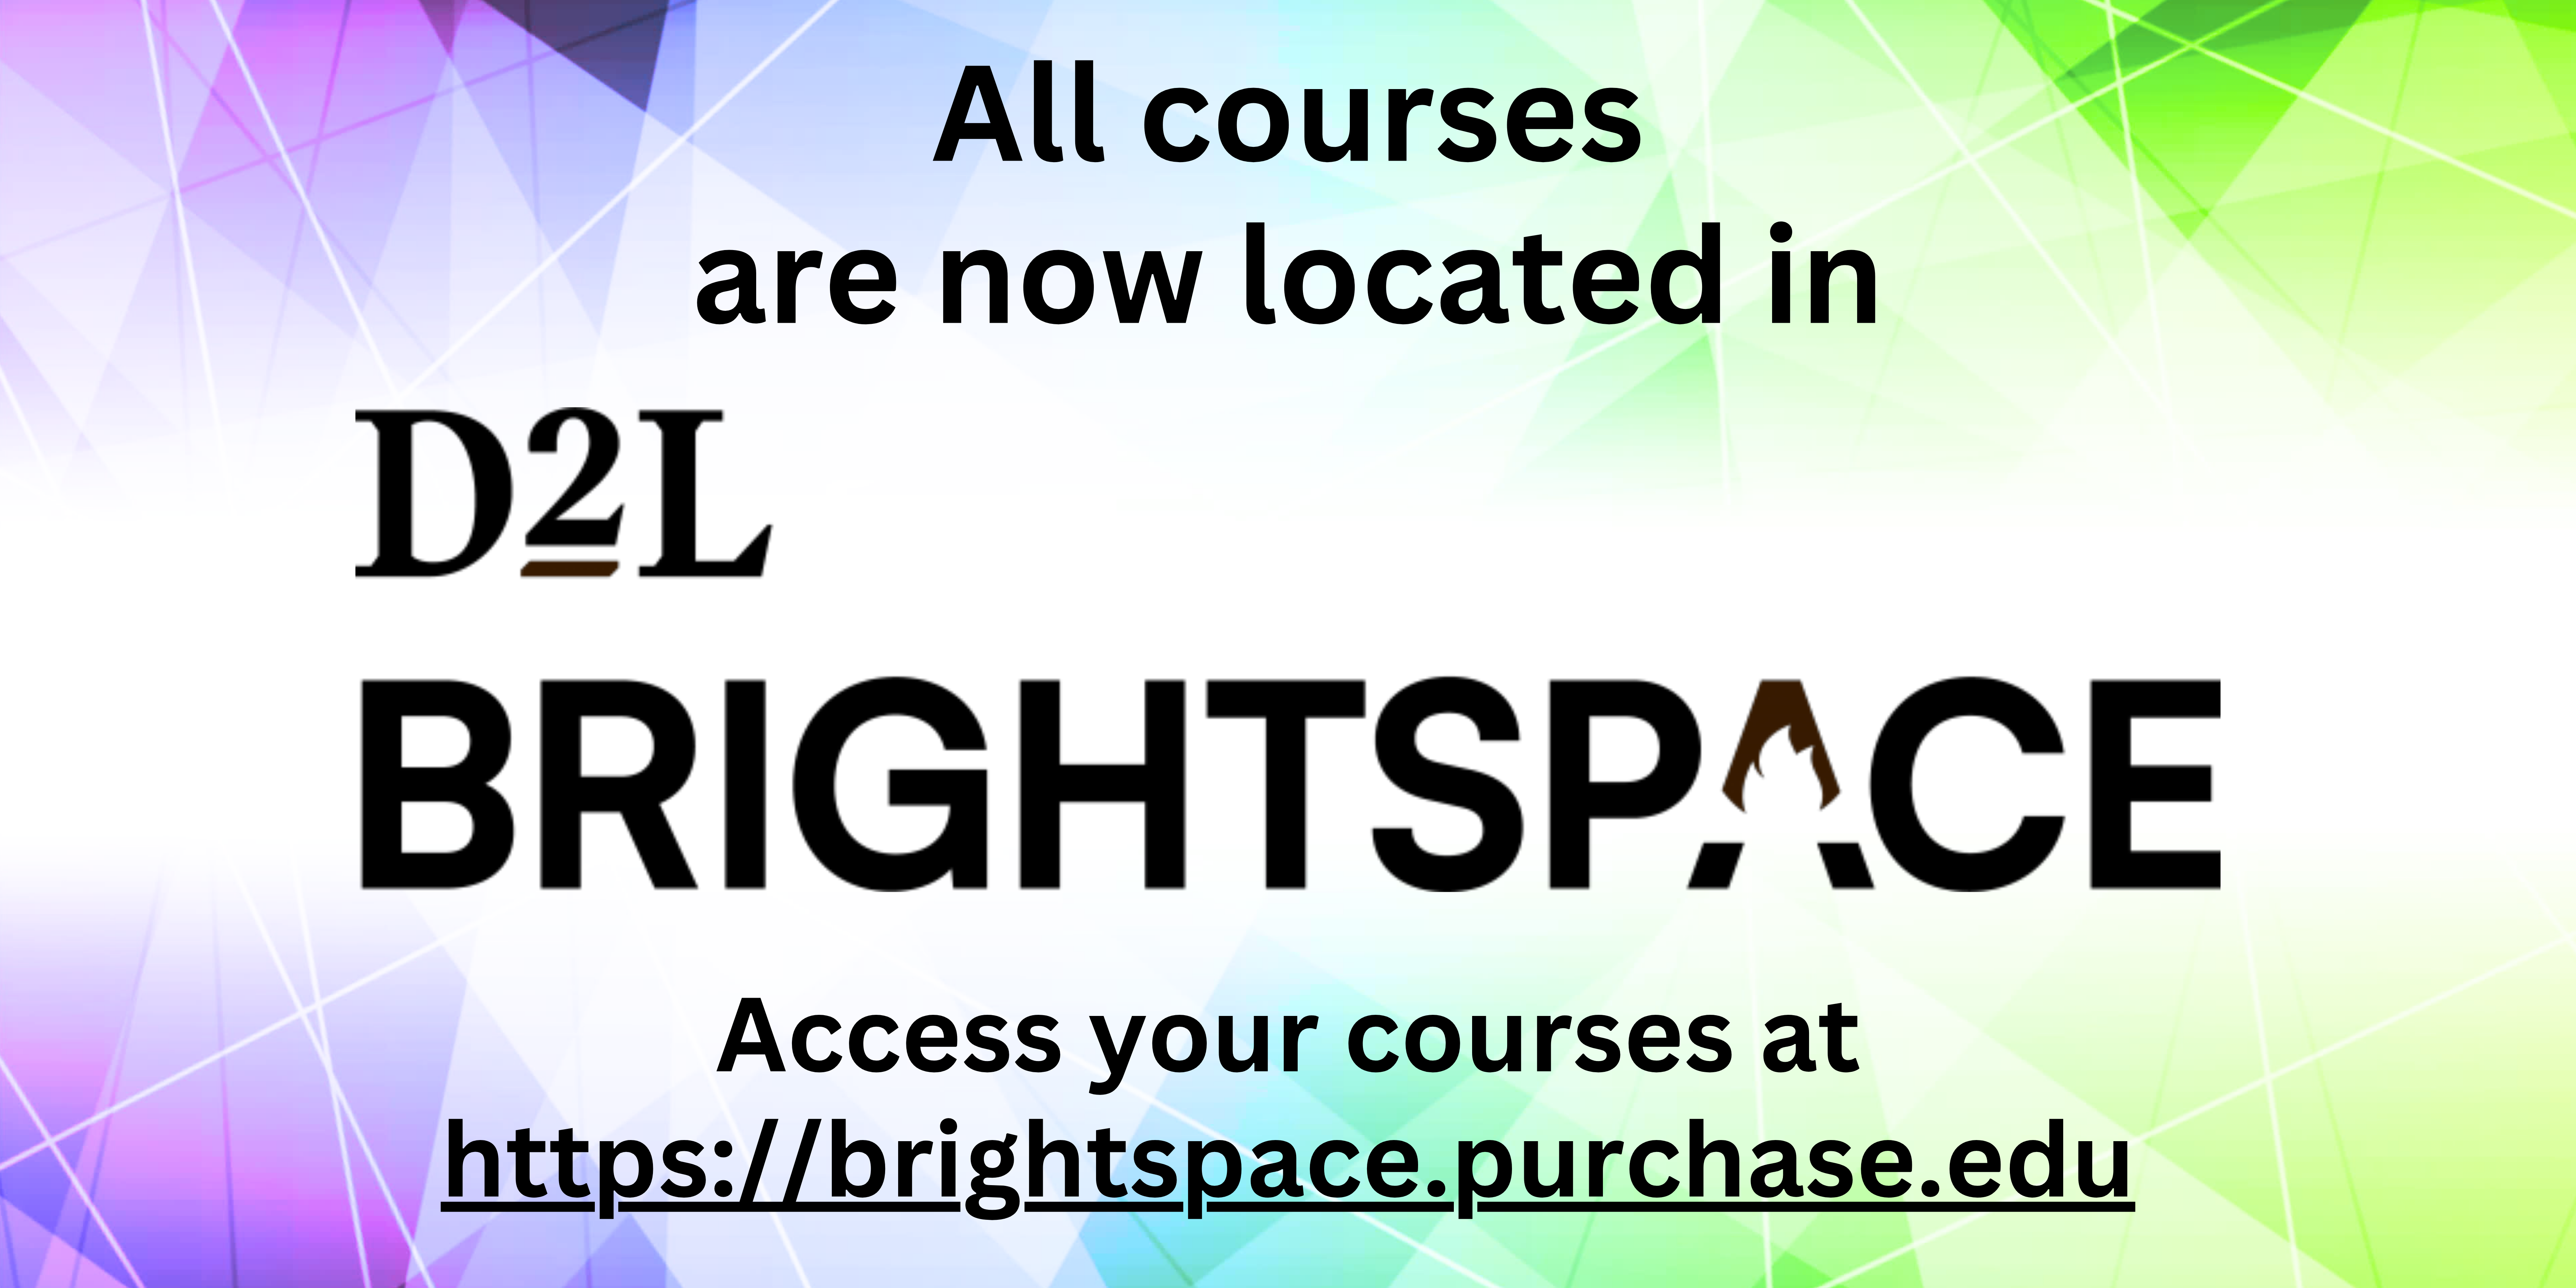 All courses are now in Brightspace